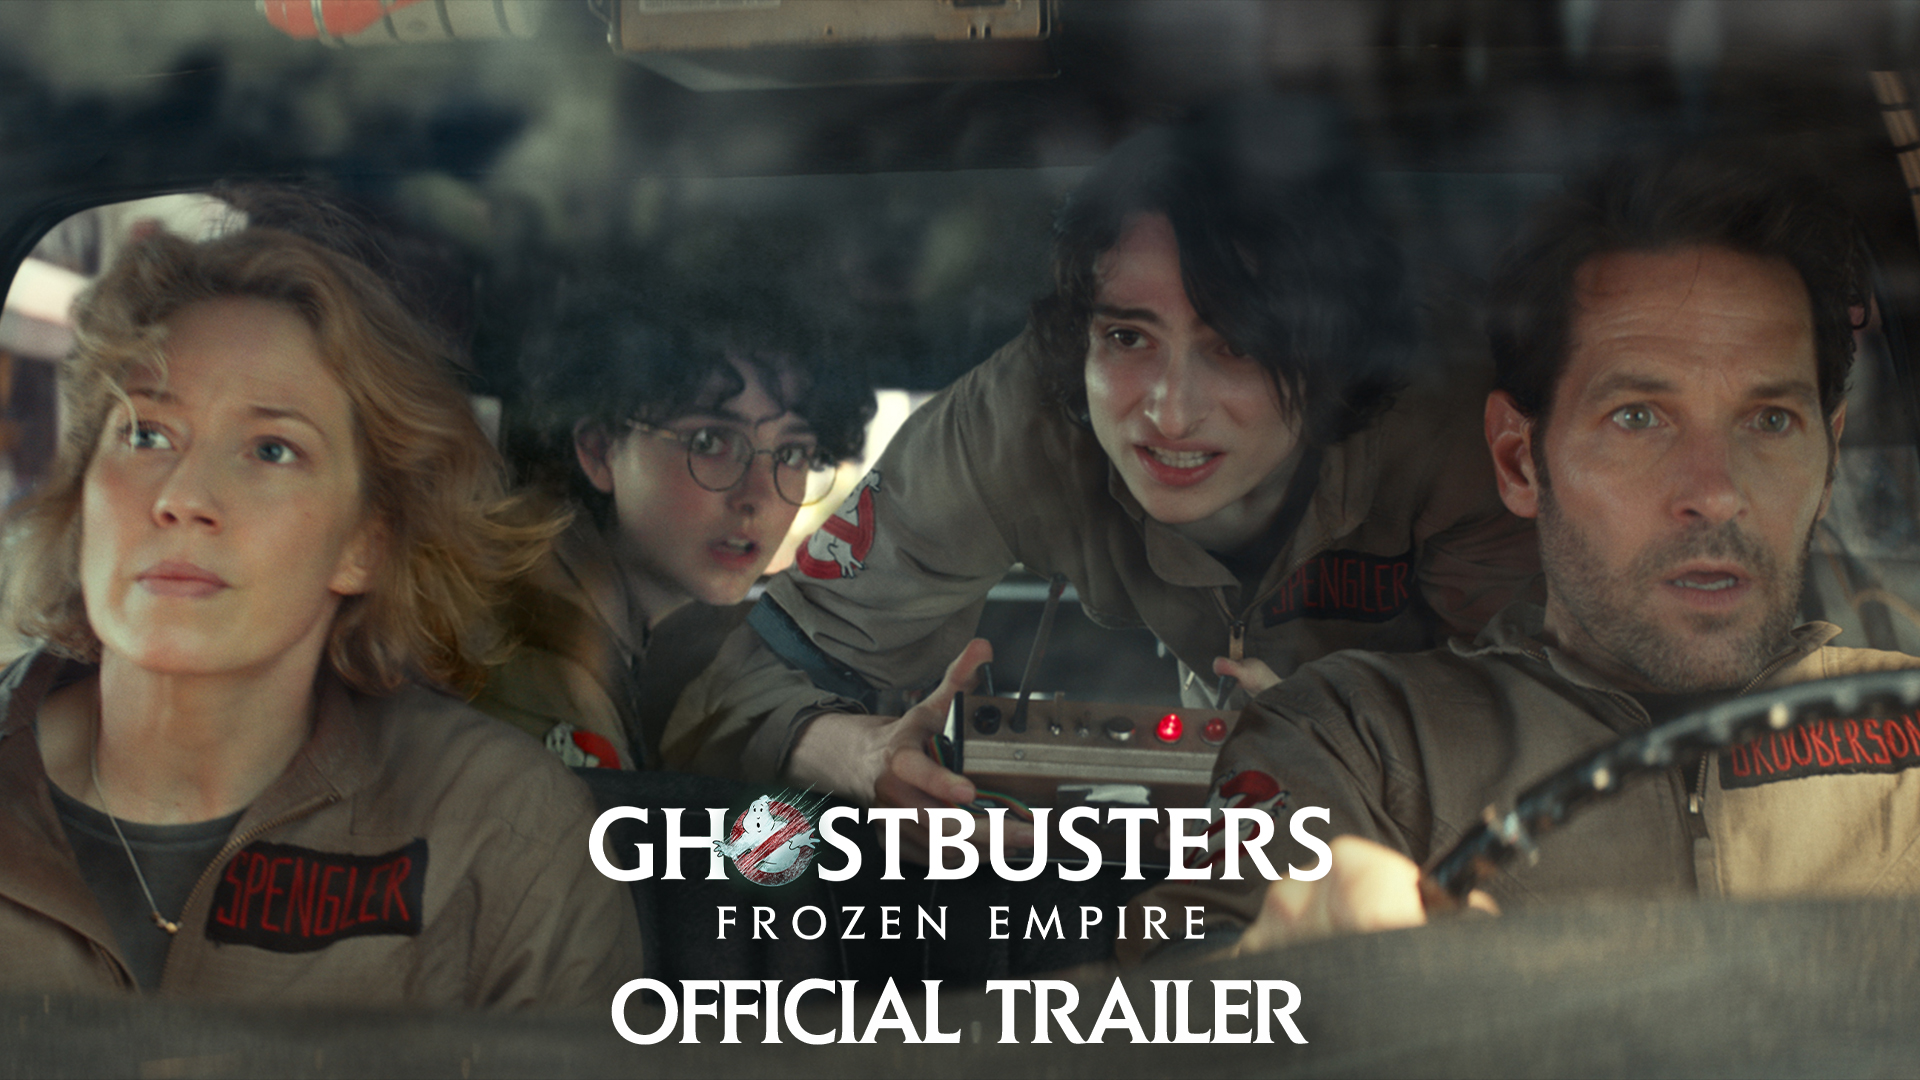 teaser image - Ghostbusters: Frozen Empire Official Trailer - The IMAX Experience